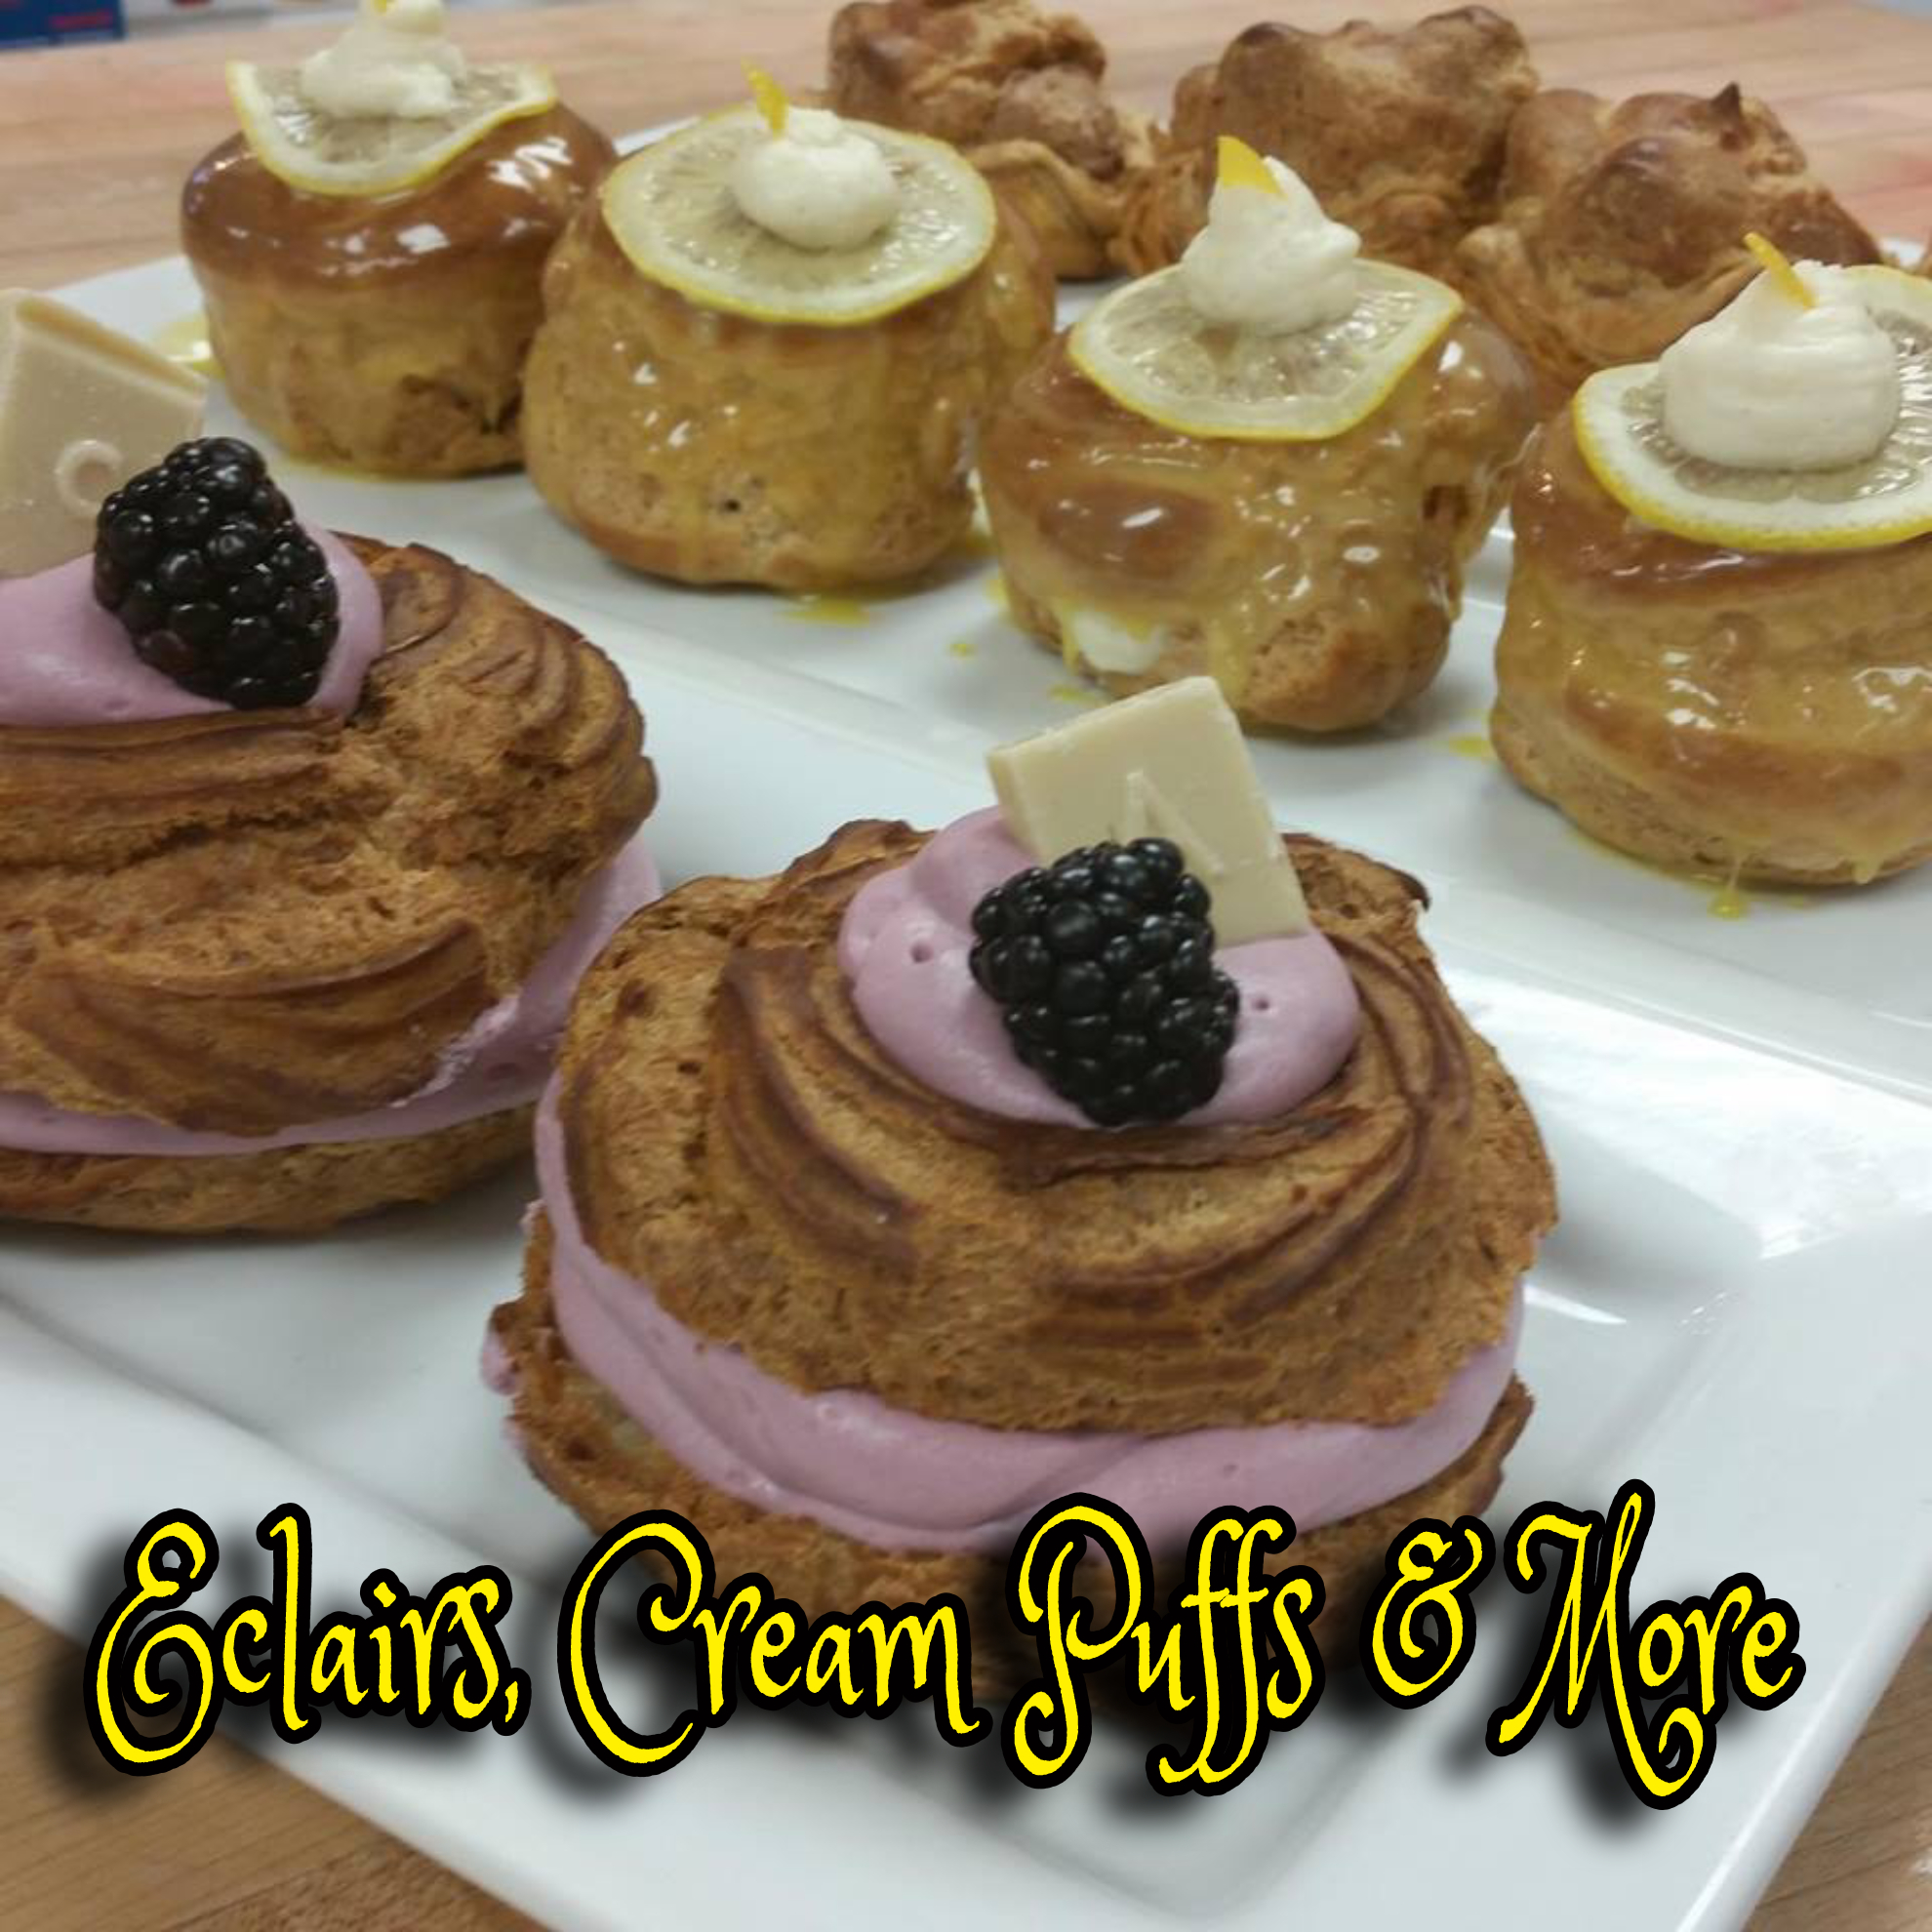 It's All About Choux: Eclairs, Cream Puffs & More Baking Class